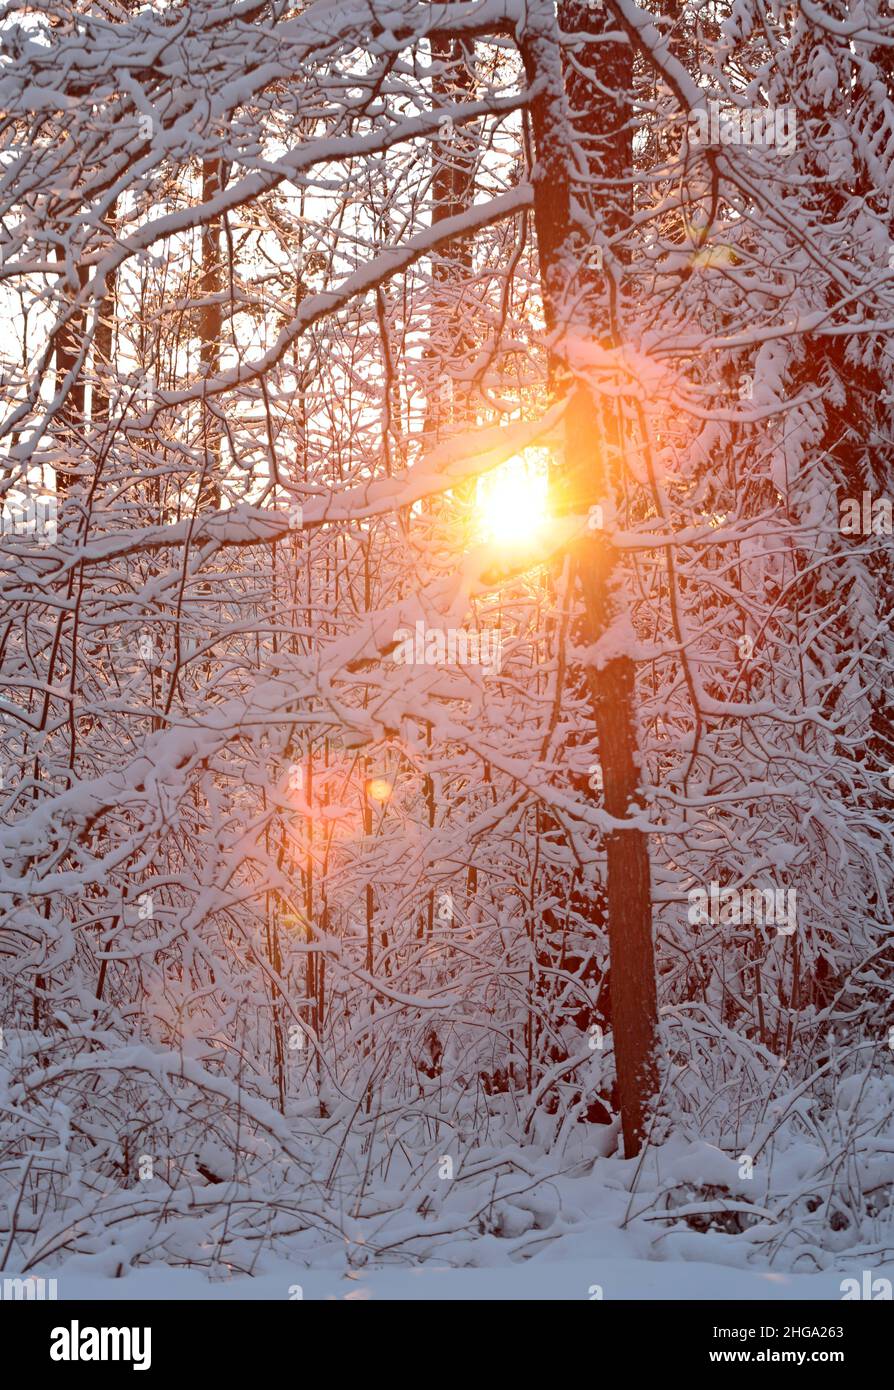 Snowy tree trunk in snowy white forest on a sunny winter day Stock Photo